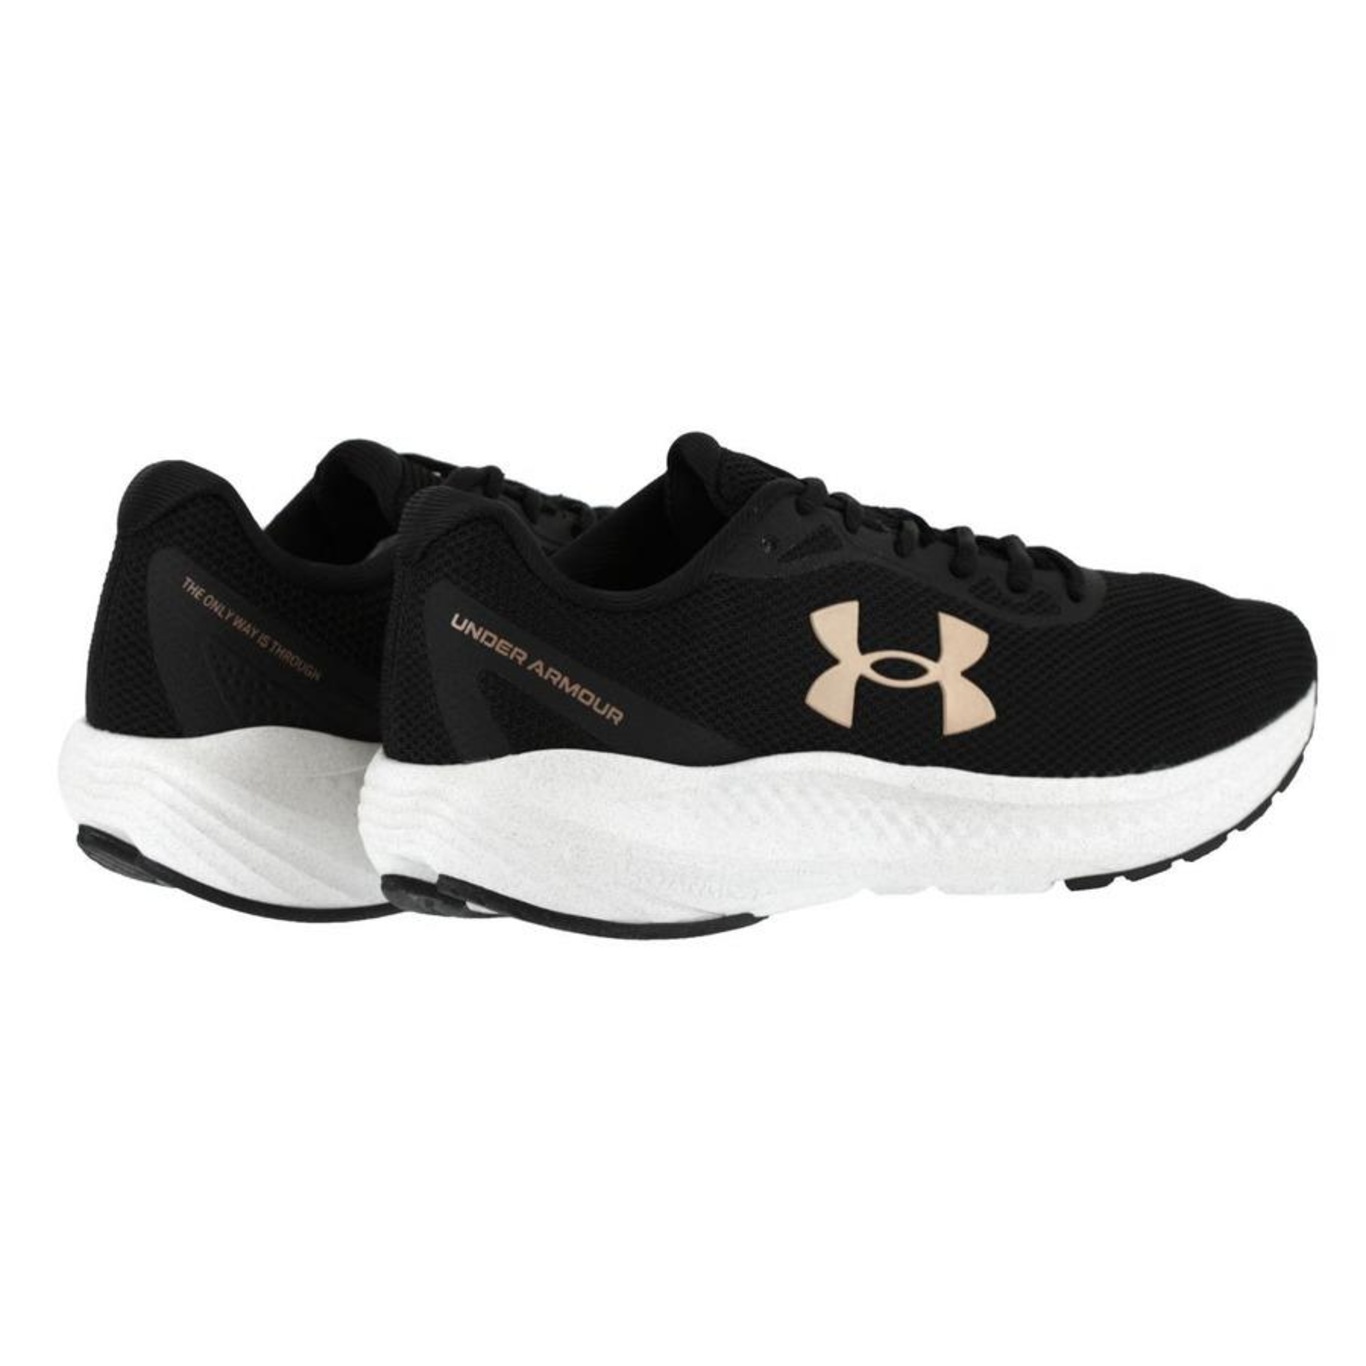 Tênis Under Armour Charged Wing Preto - Adulto